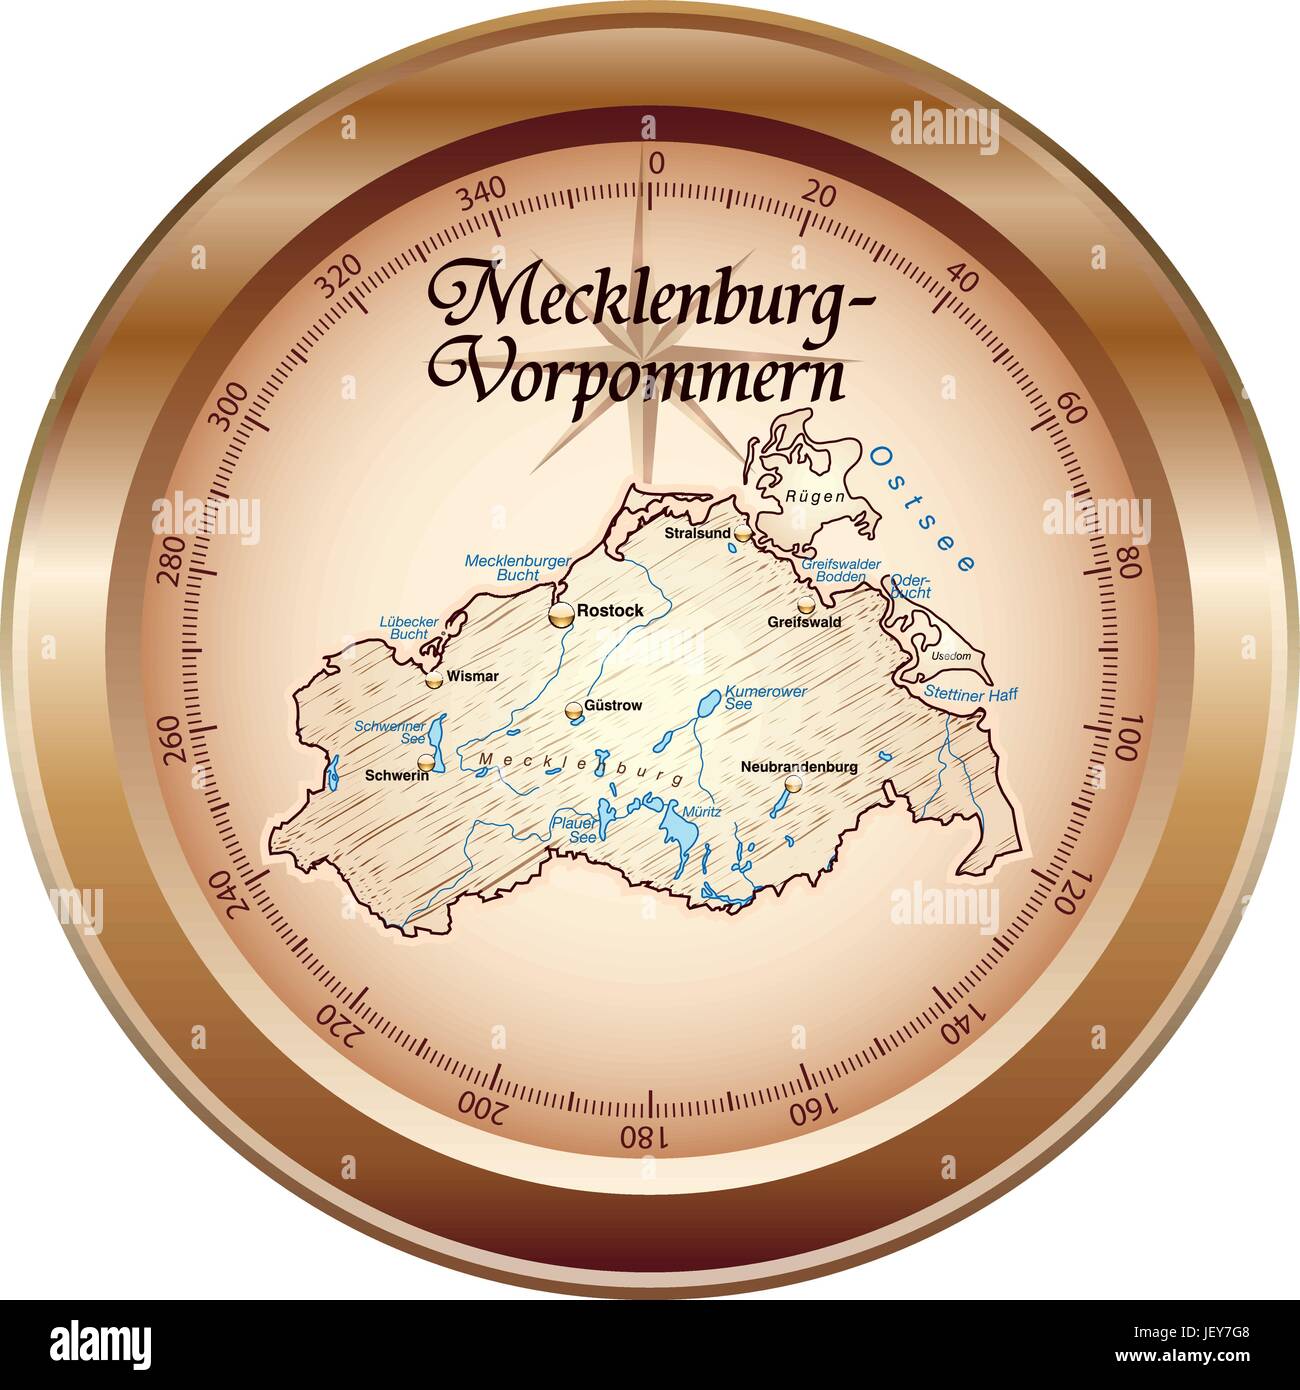 Map Of Mecklenburg Vorpommern As An Overview Map In Bronze JEY7G8 